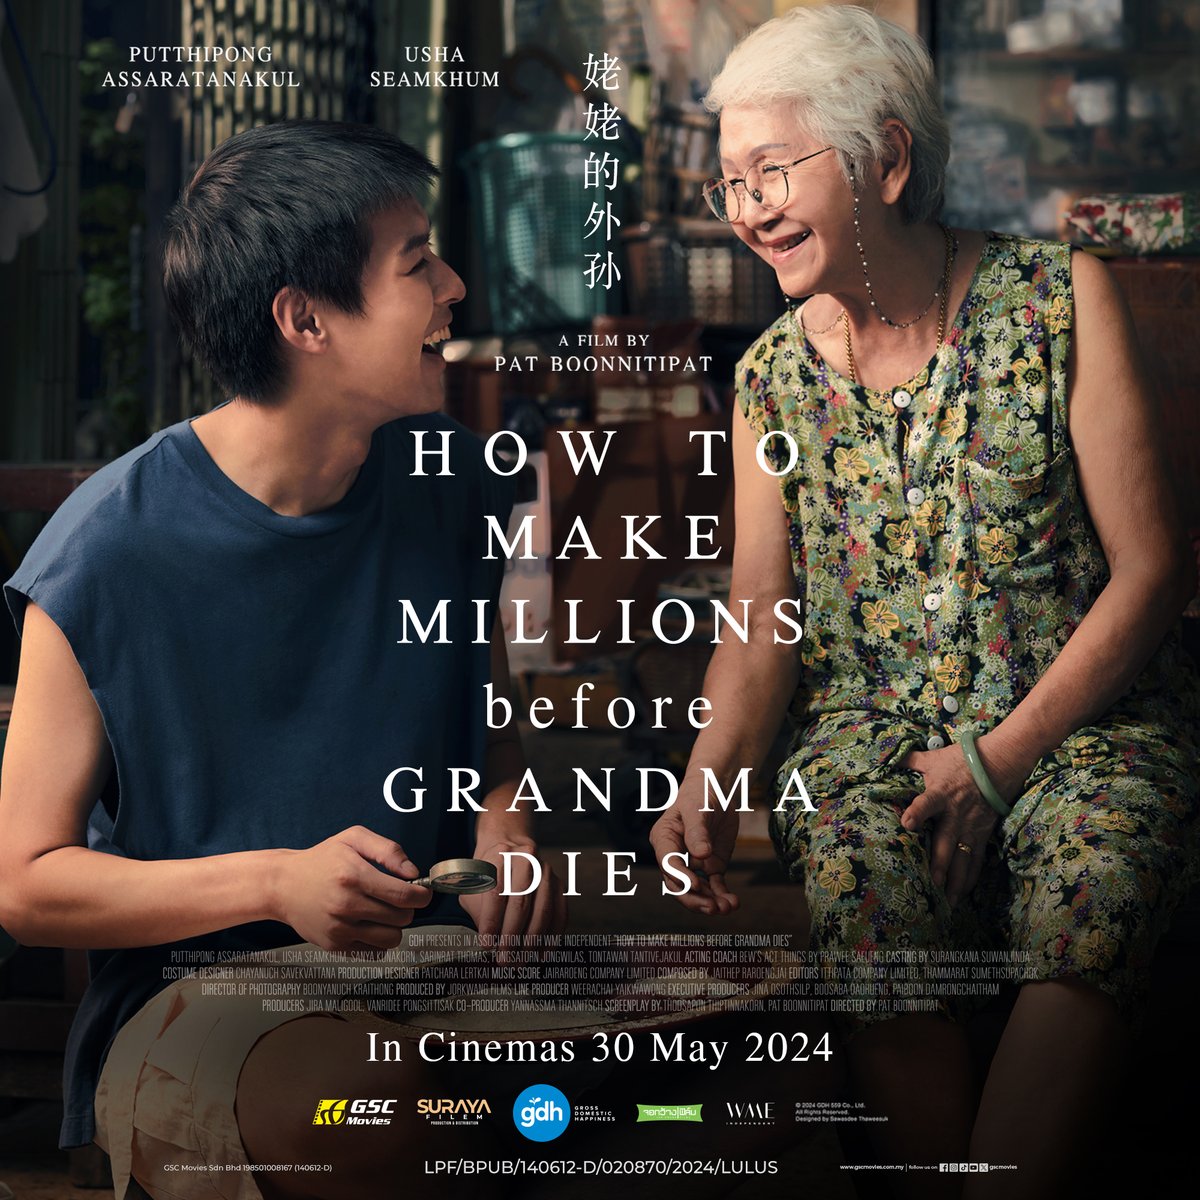 Get ready to laugh, cry and feel every emotion as you immerse yourself in #HowToMakeMillionsBeforeGrandmaDies 😢 Gather your loved ones and be among the first to experience a heartwarming tale of love that will leave you smiling and teary-eyed, in #LFSCinemas 30th May ❤